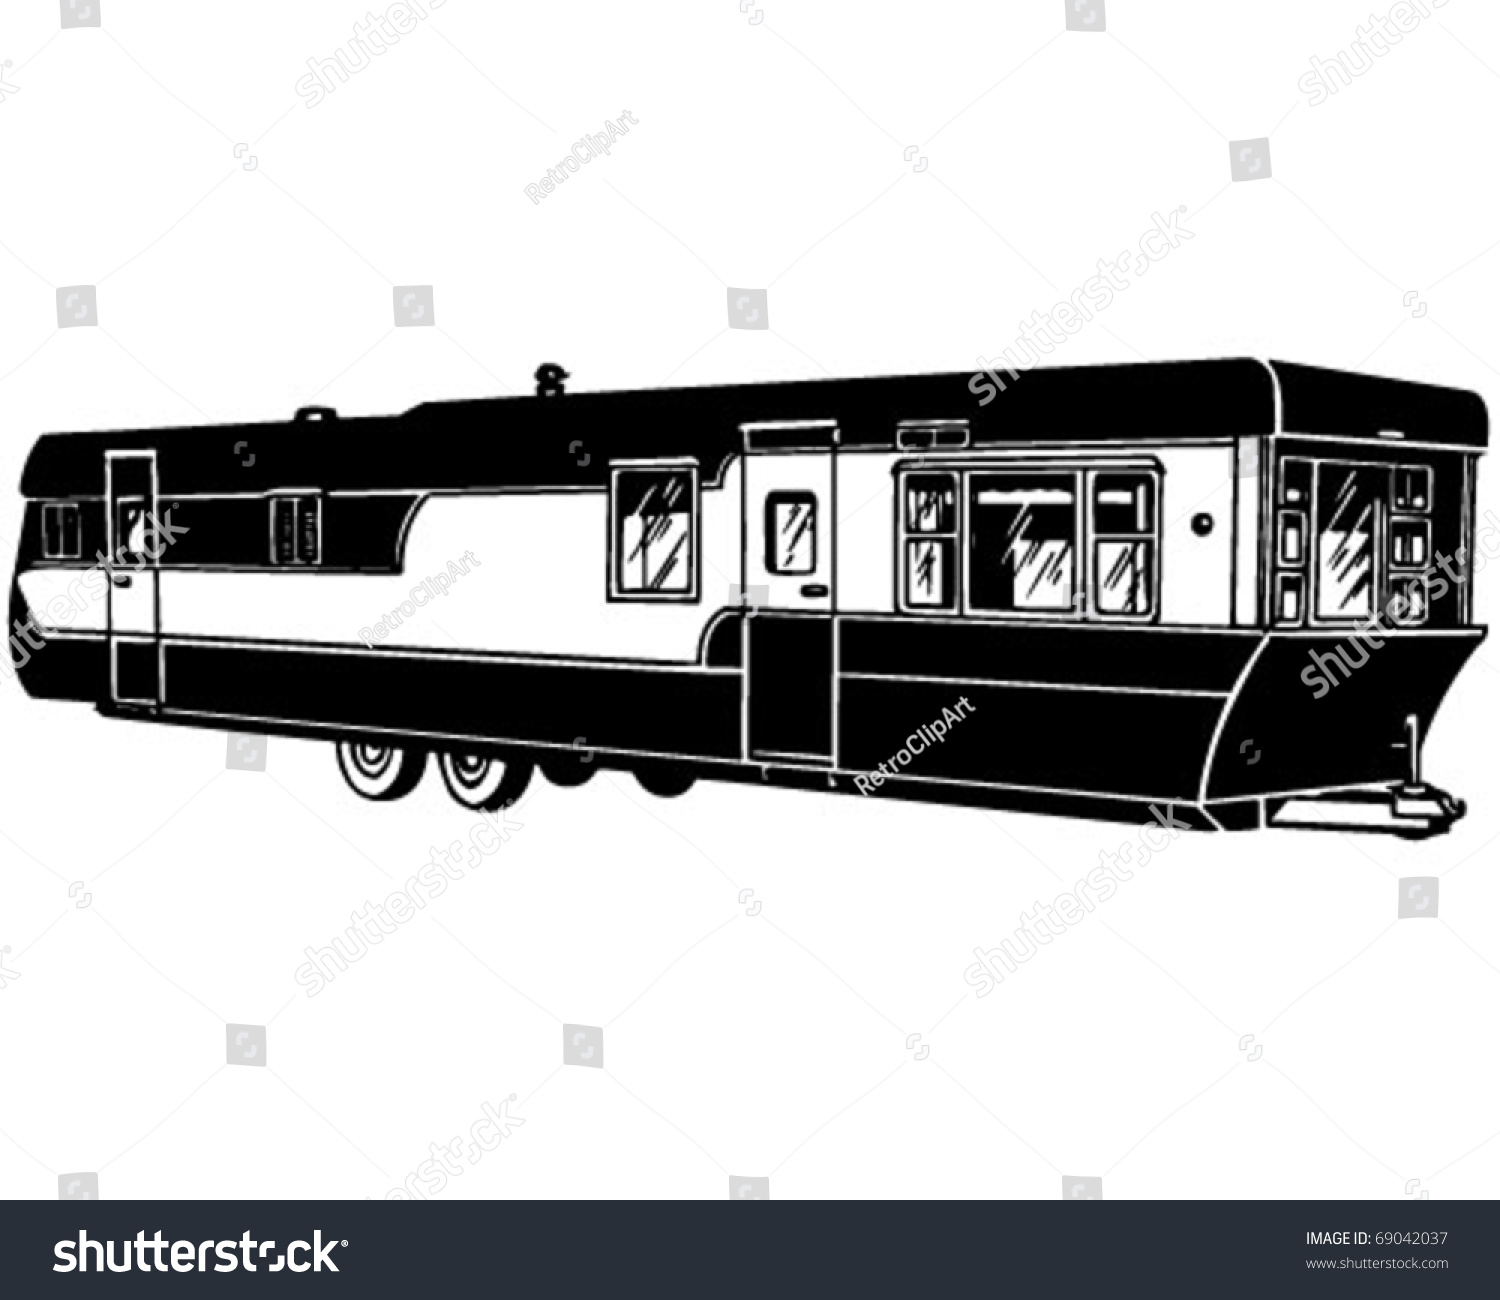 mobile home clipart free - photo #44